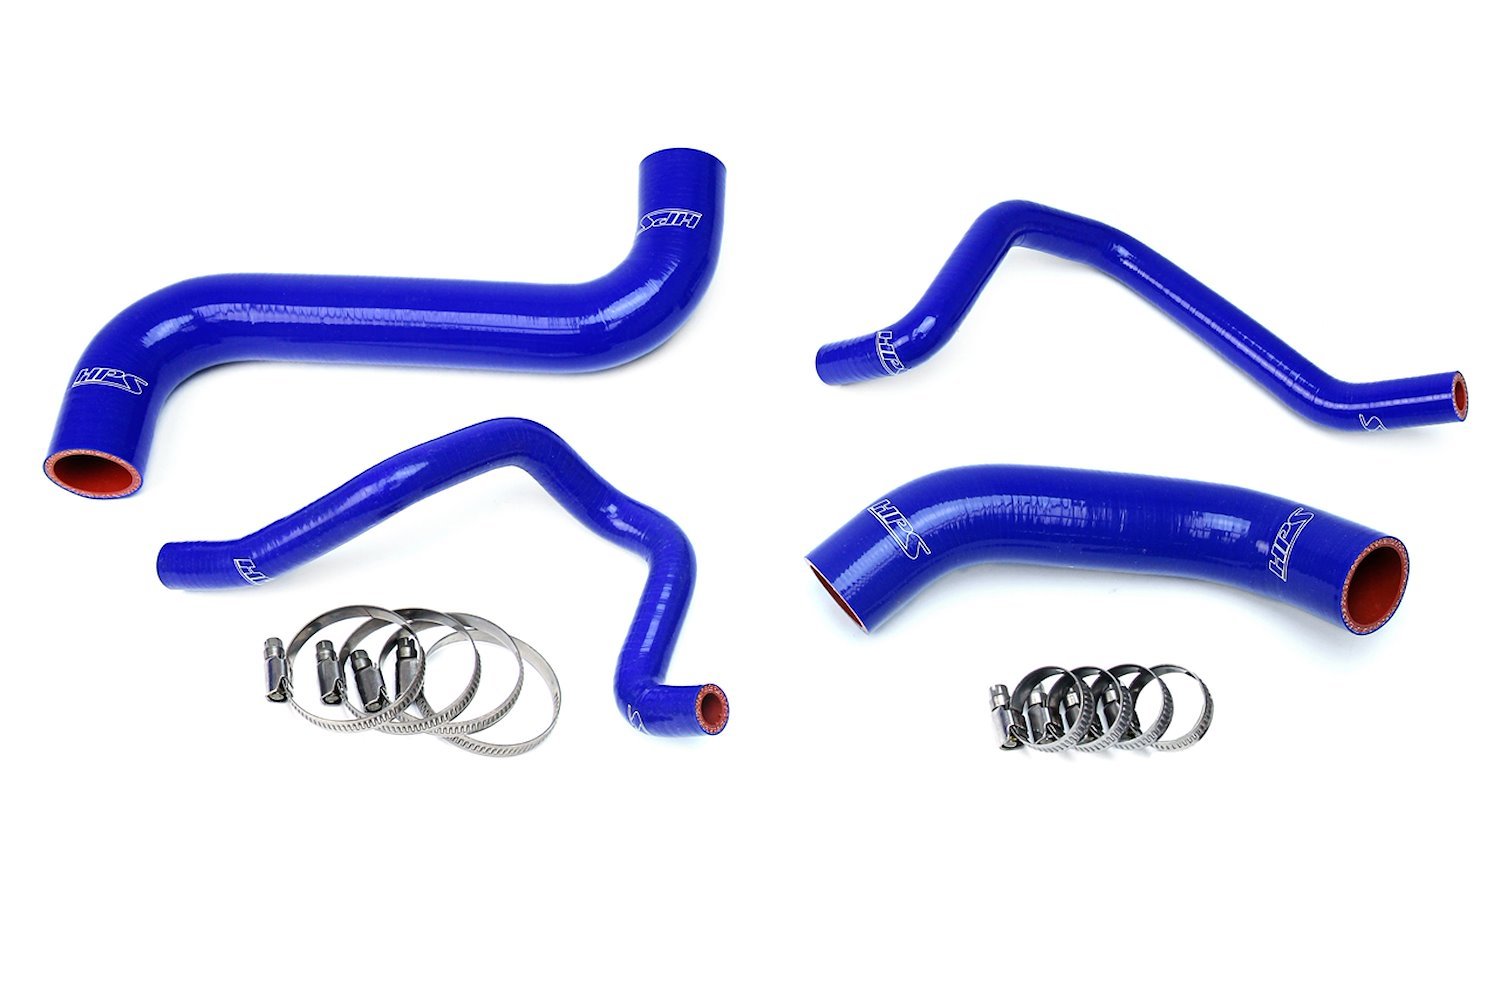 57-1734-BLUE Coolant Hose Kit, High-Temp 3-Ply Reinforced Silicone, Replace Rubber Radiator Heater Coolant Hoses